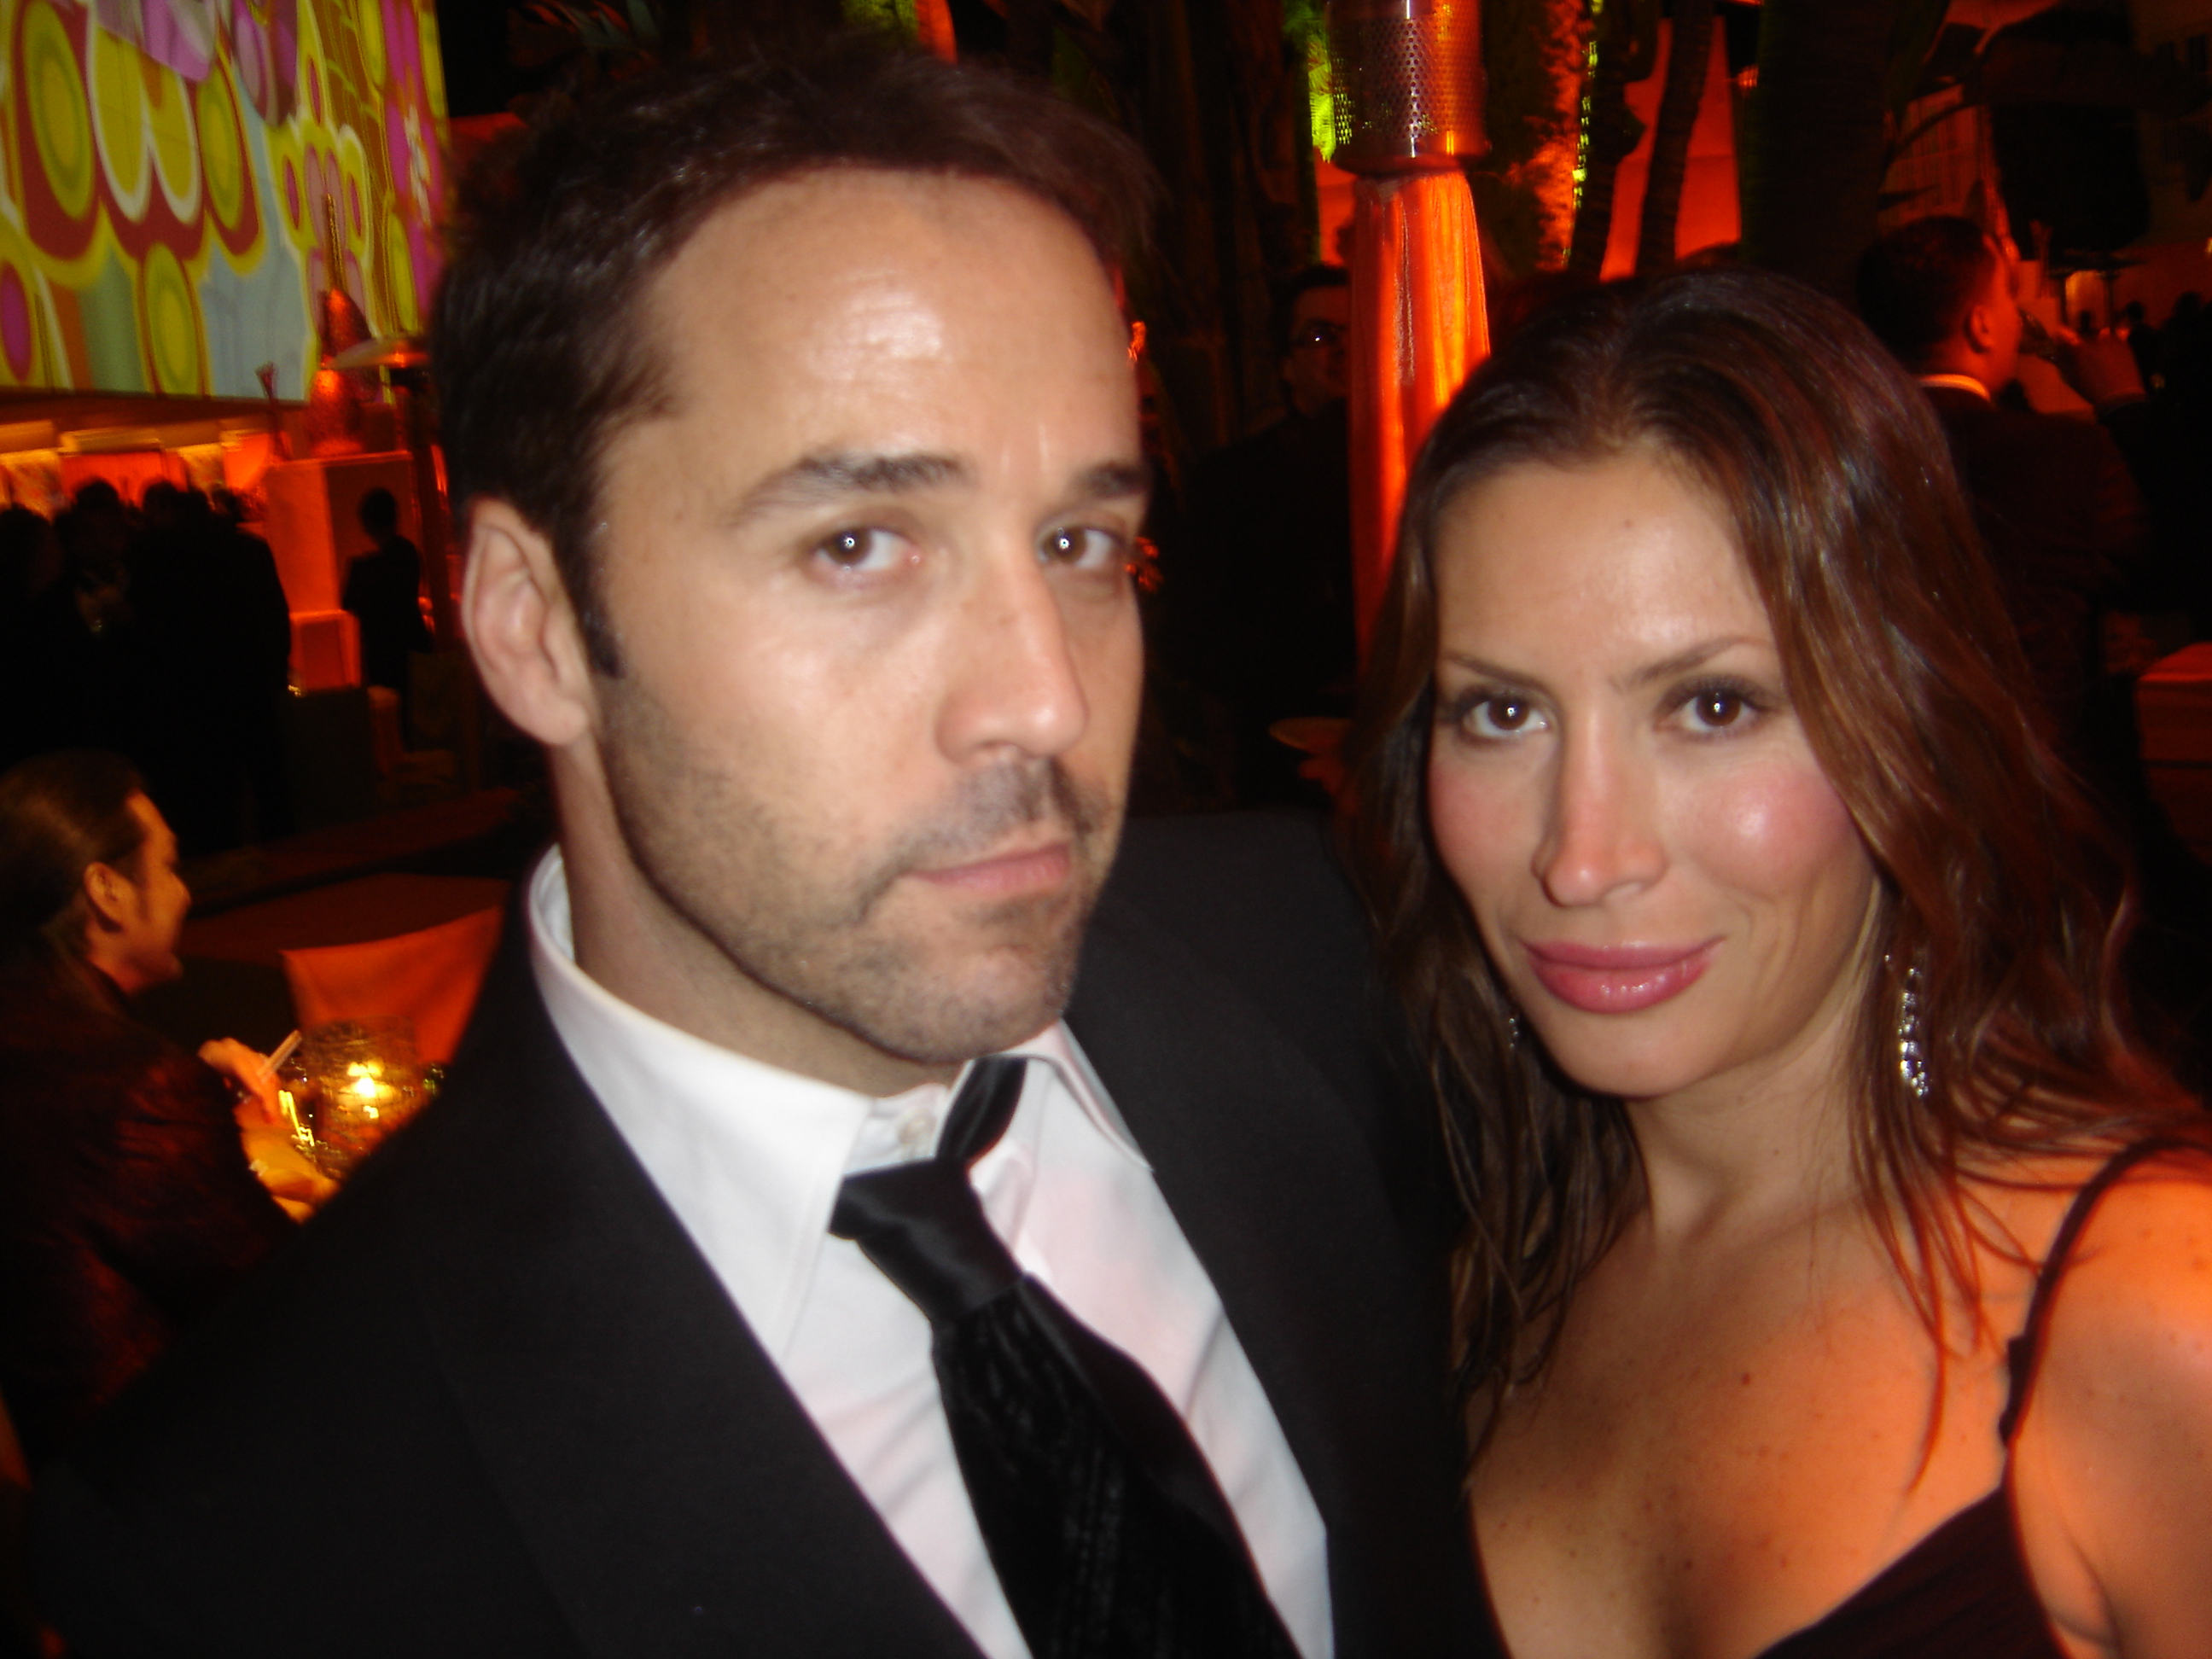 Golden Globes Party 2006 at HBO